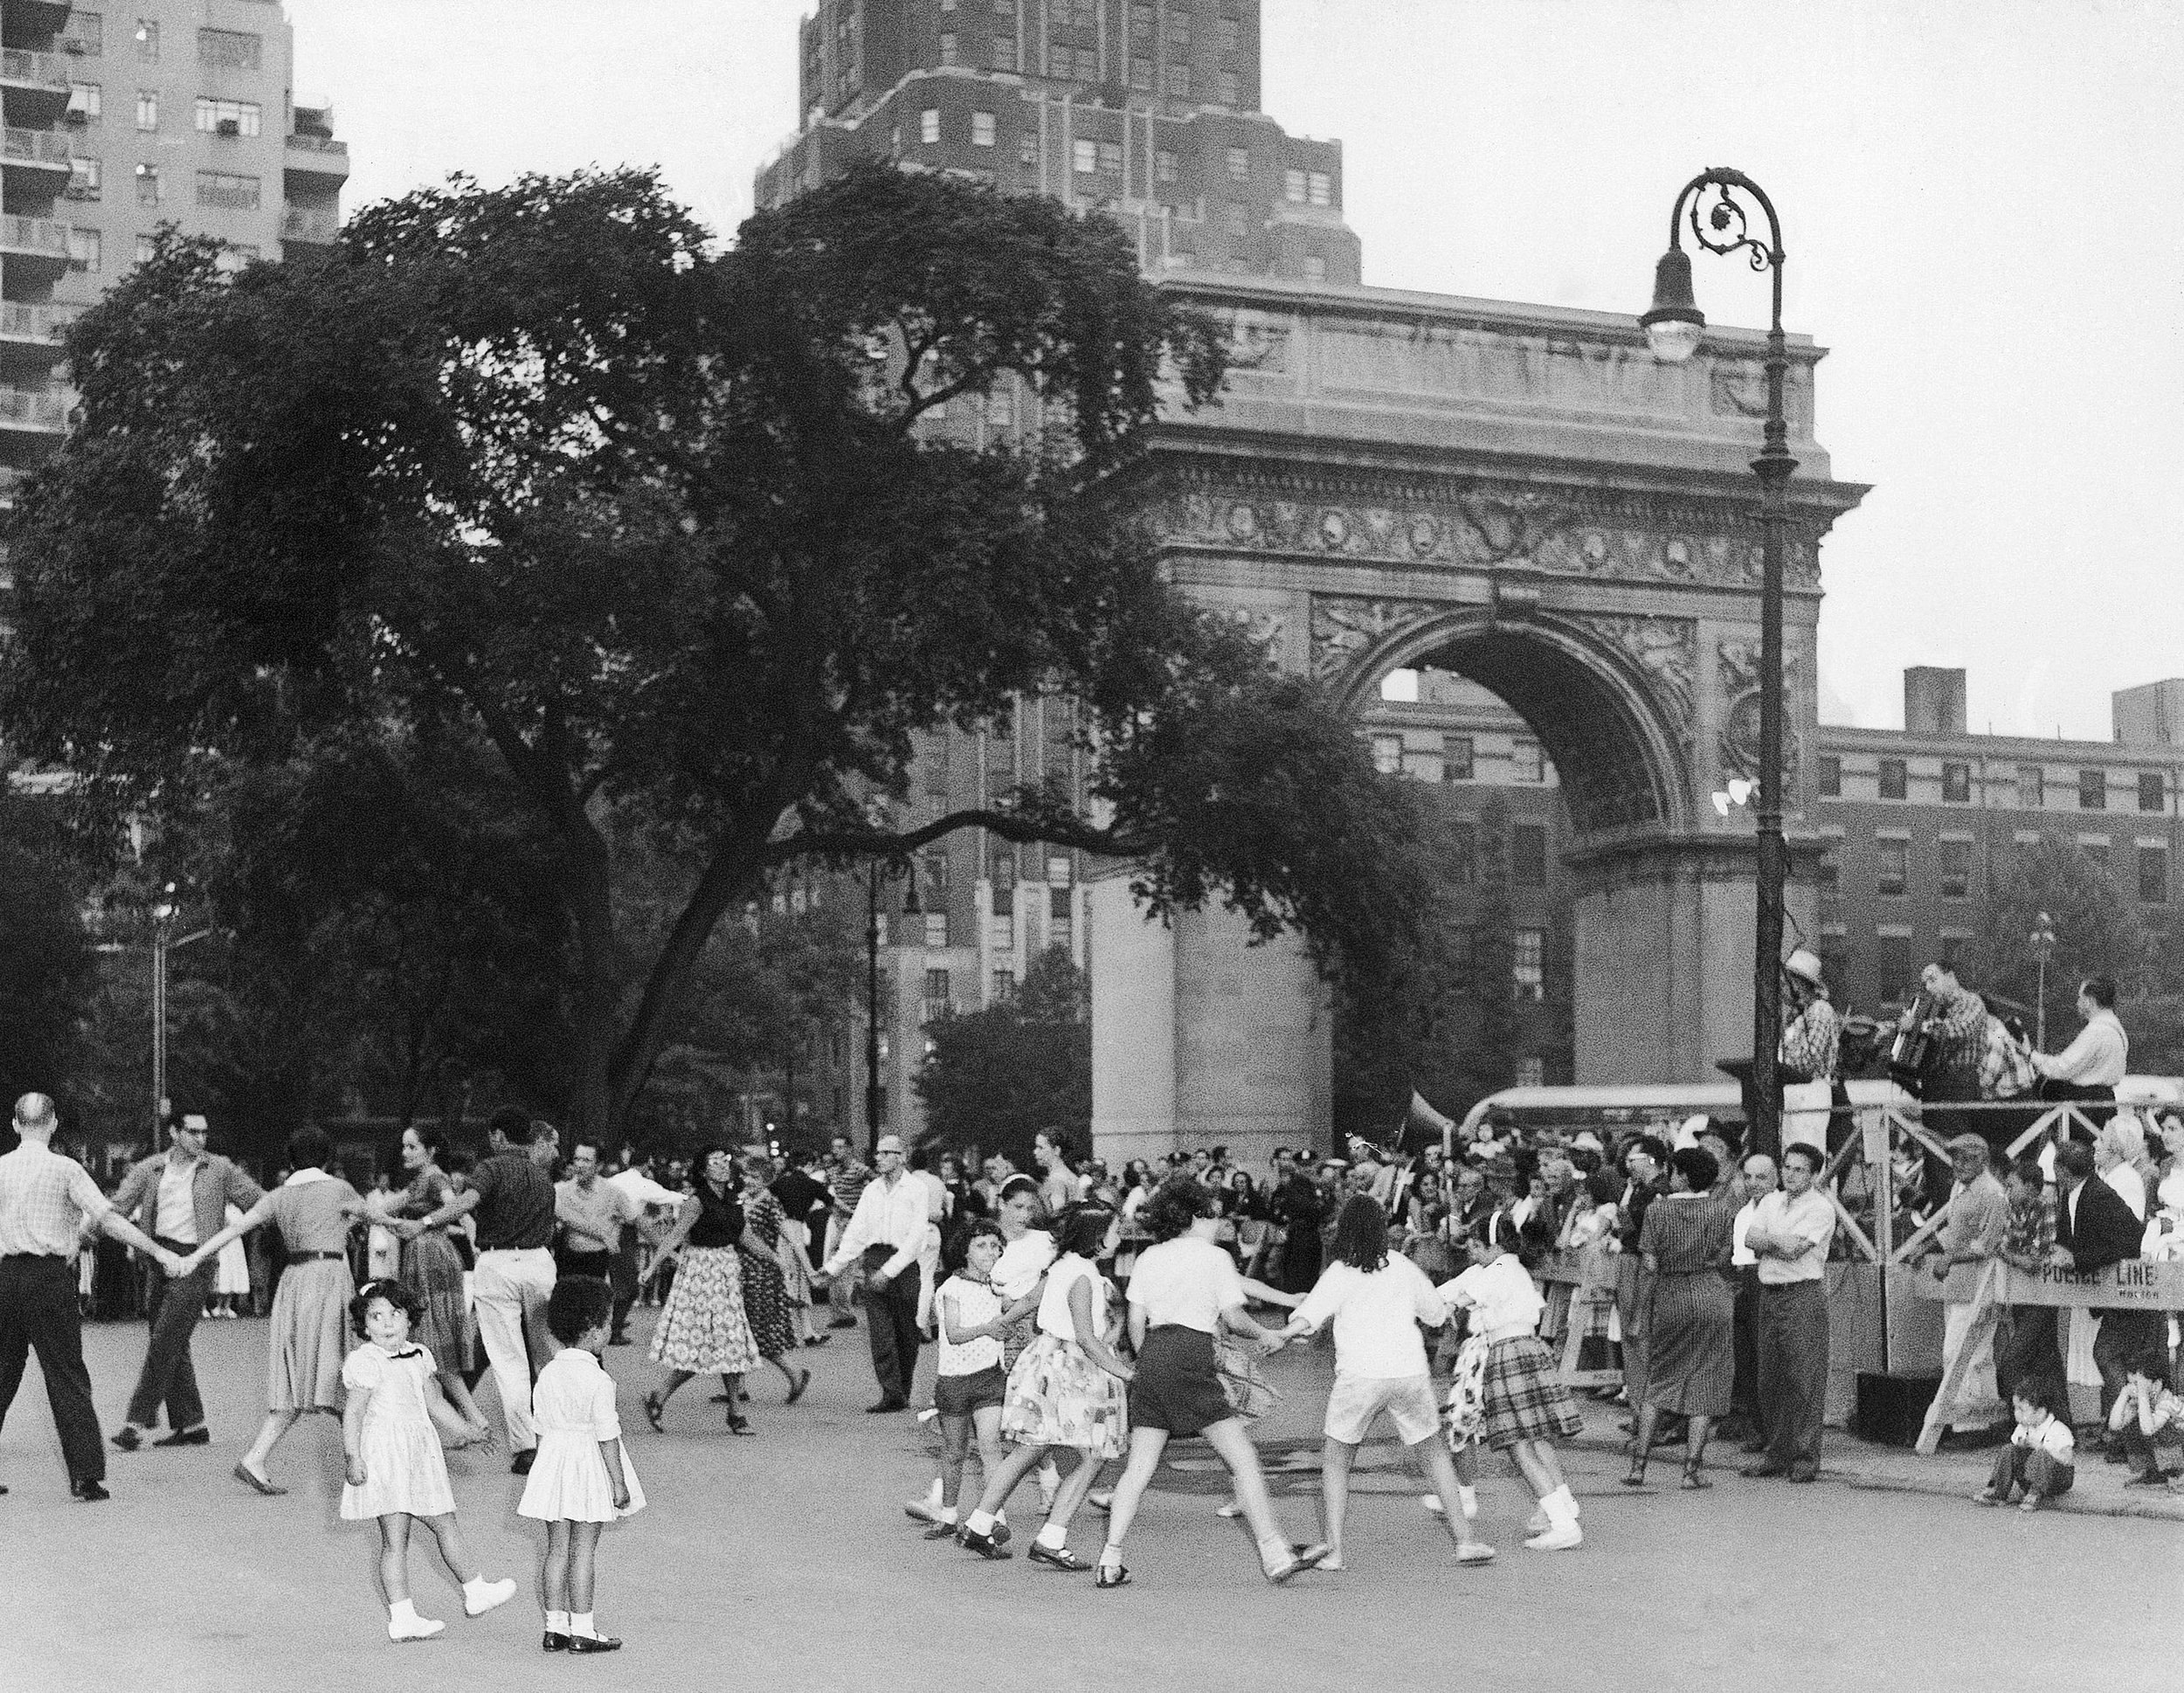  New York City’s Greenwich Village, playground of the bohemian and the workshop of the artist, has acquired a grass roots complexion. When the weather is good, square dancing, the joy of country folk, takes over in Washington Square in evening on Thu